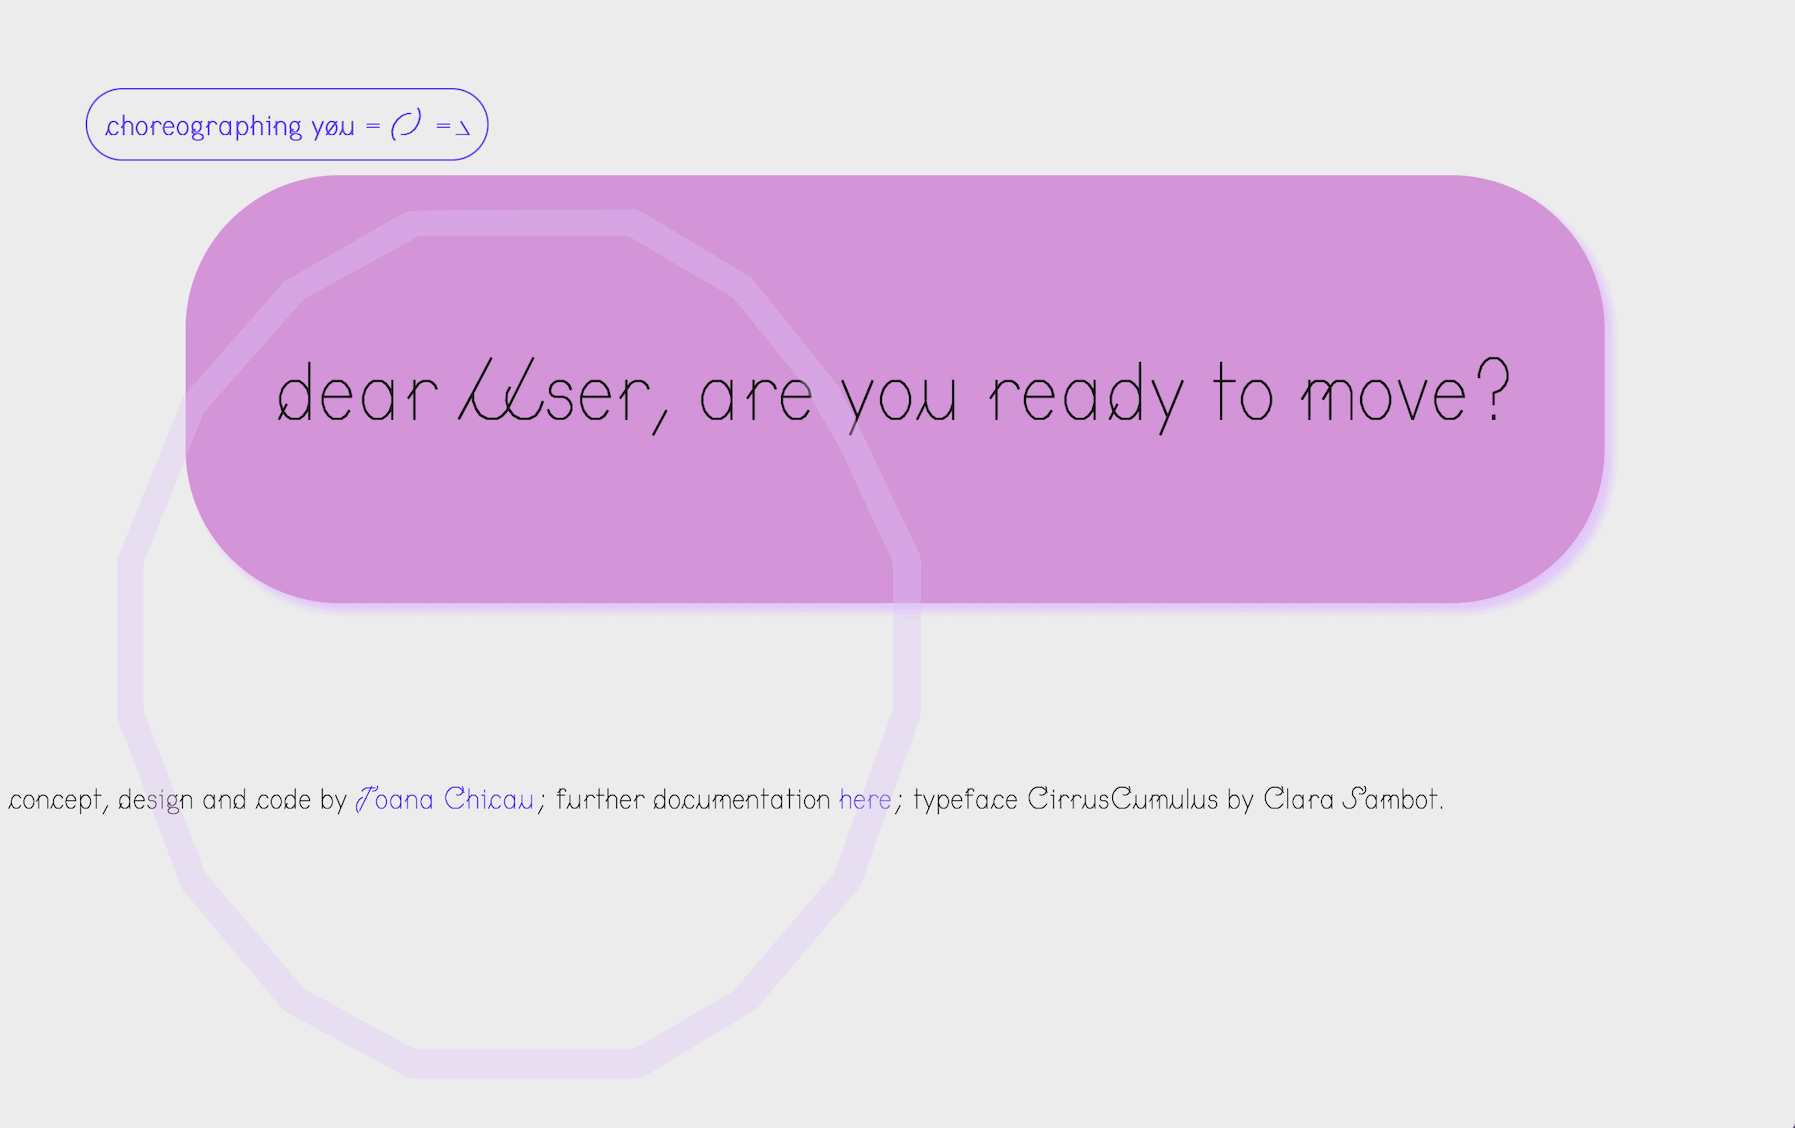 image displaying an animated gif showing the artwork, with text in gray over pink background saying: Dear User, are you ready to move?